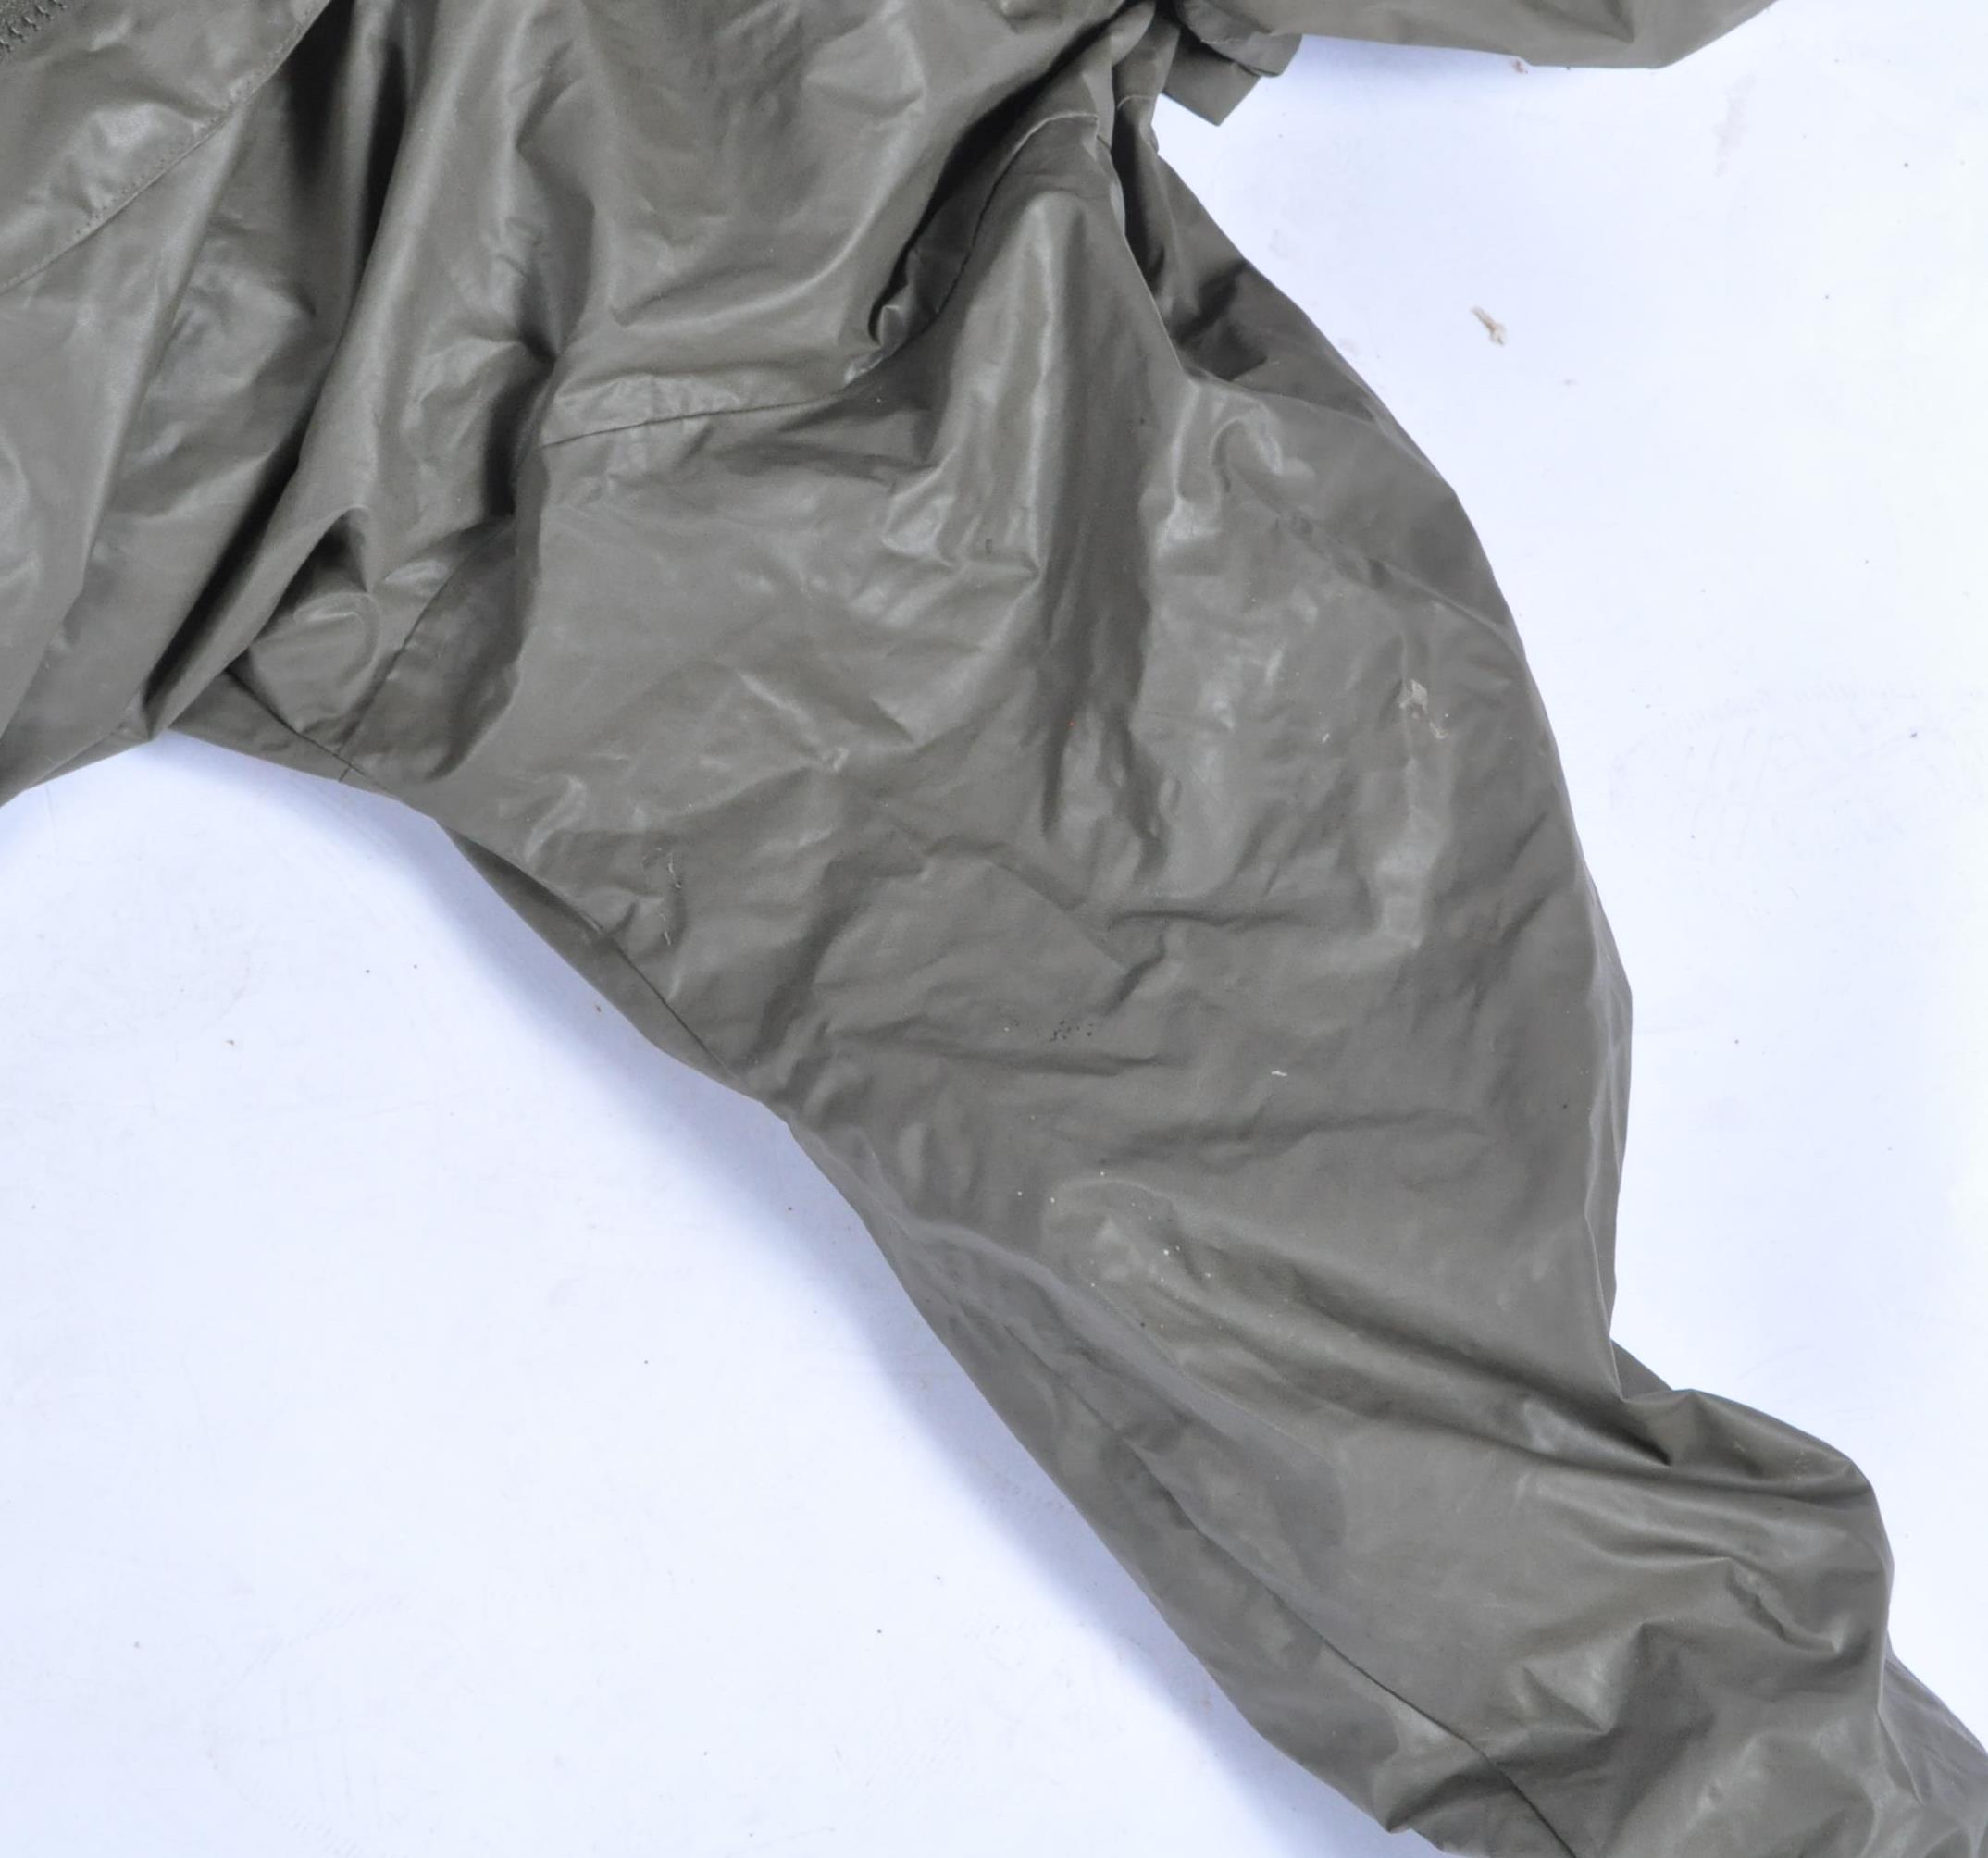 20TH CENTURY GERMAN SPECIAL FORCES / SNIPER'S LAY UP BAG - Image 5 of 6